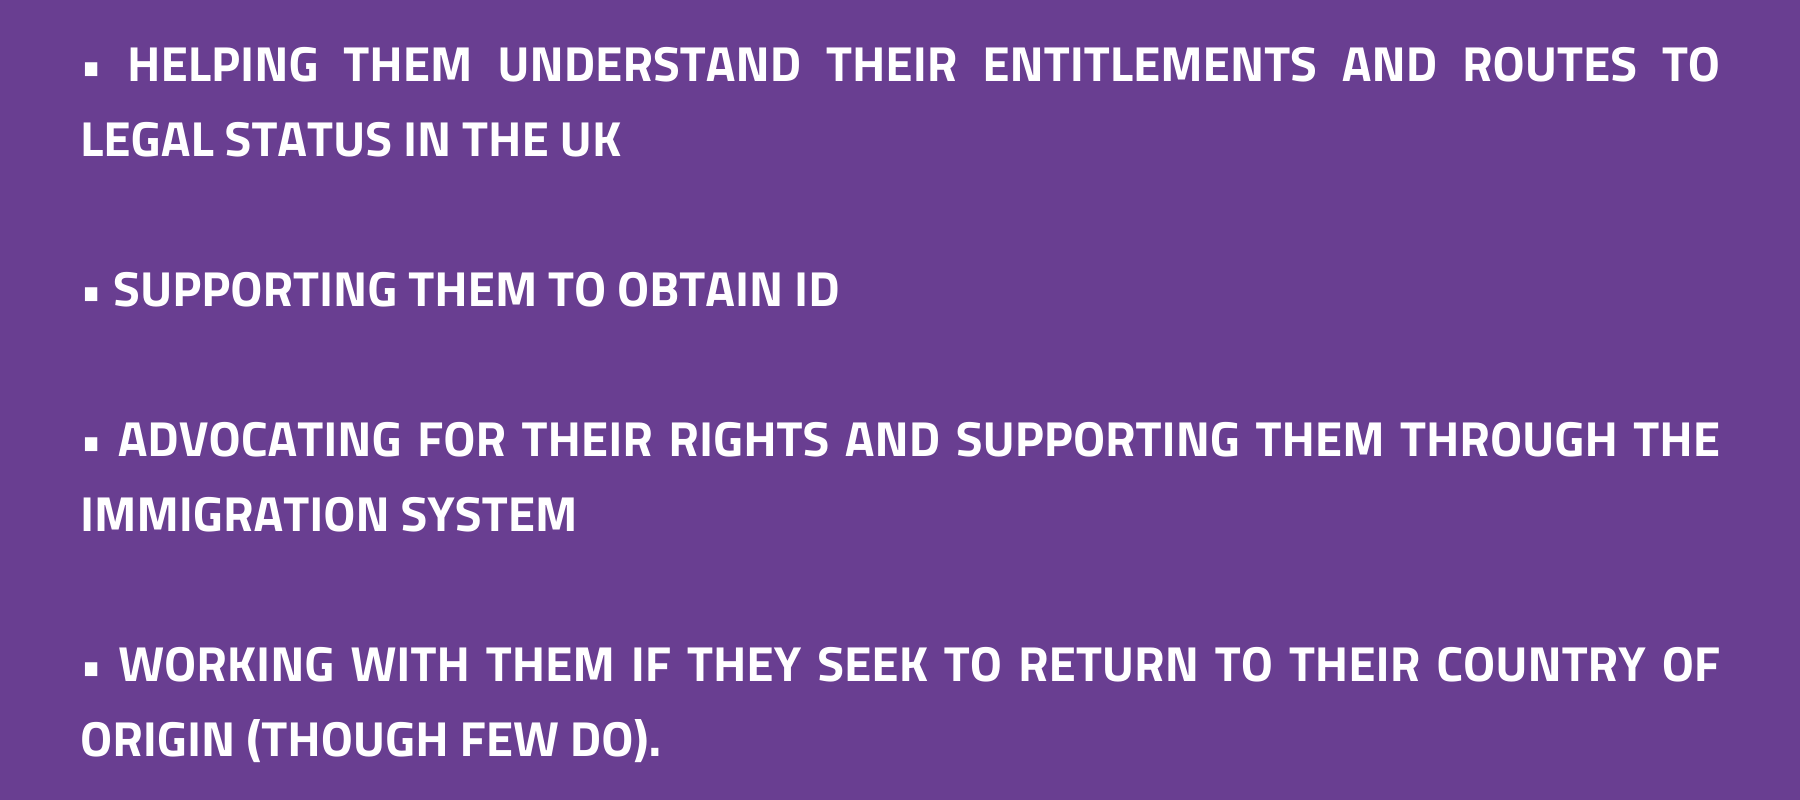 	helping them understand their entitlements and routes to legal status in the UK; supporting them to obtain ID; advocating for their rights and supporting them through the immigration system; working with them if they seek to return to their country of origin (though few do). 